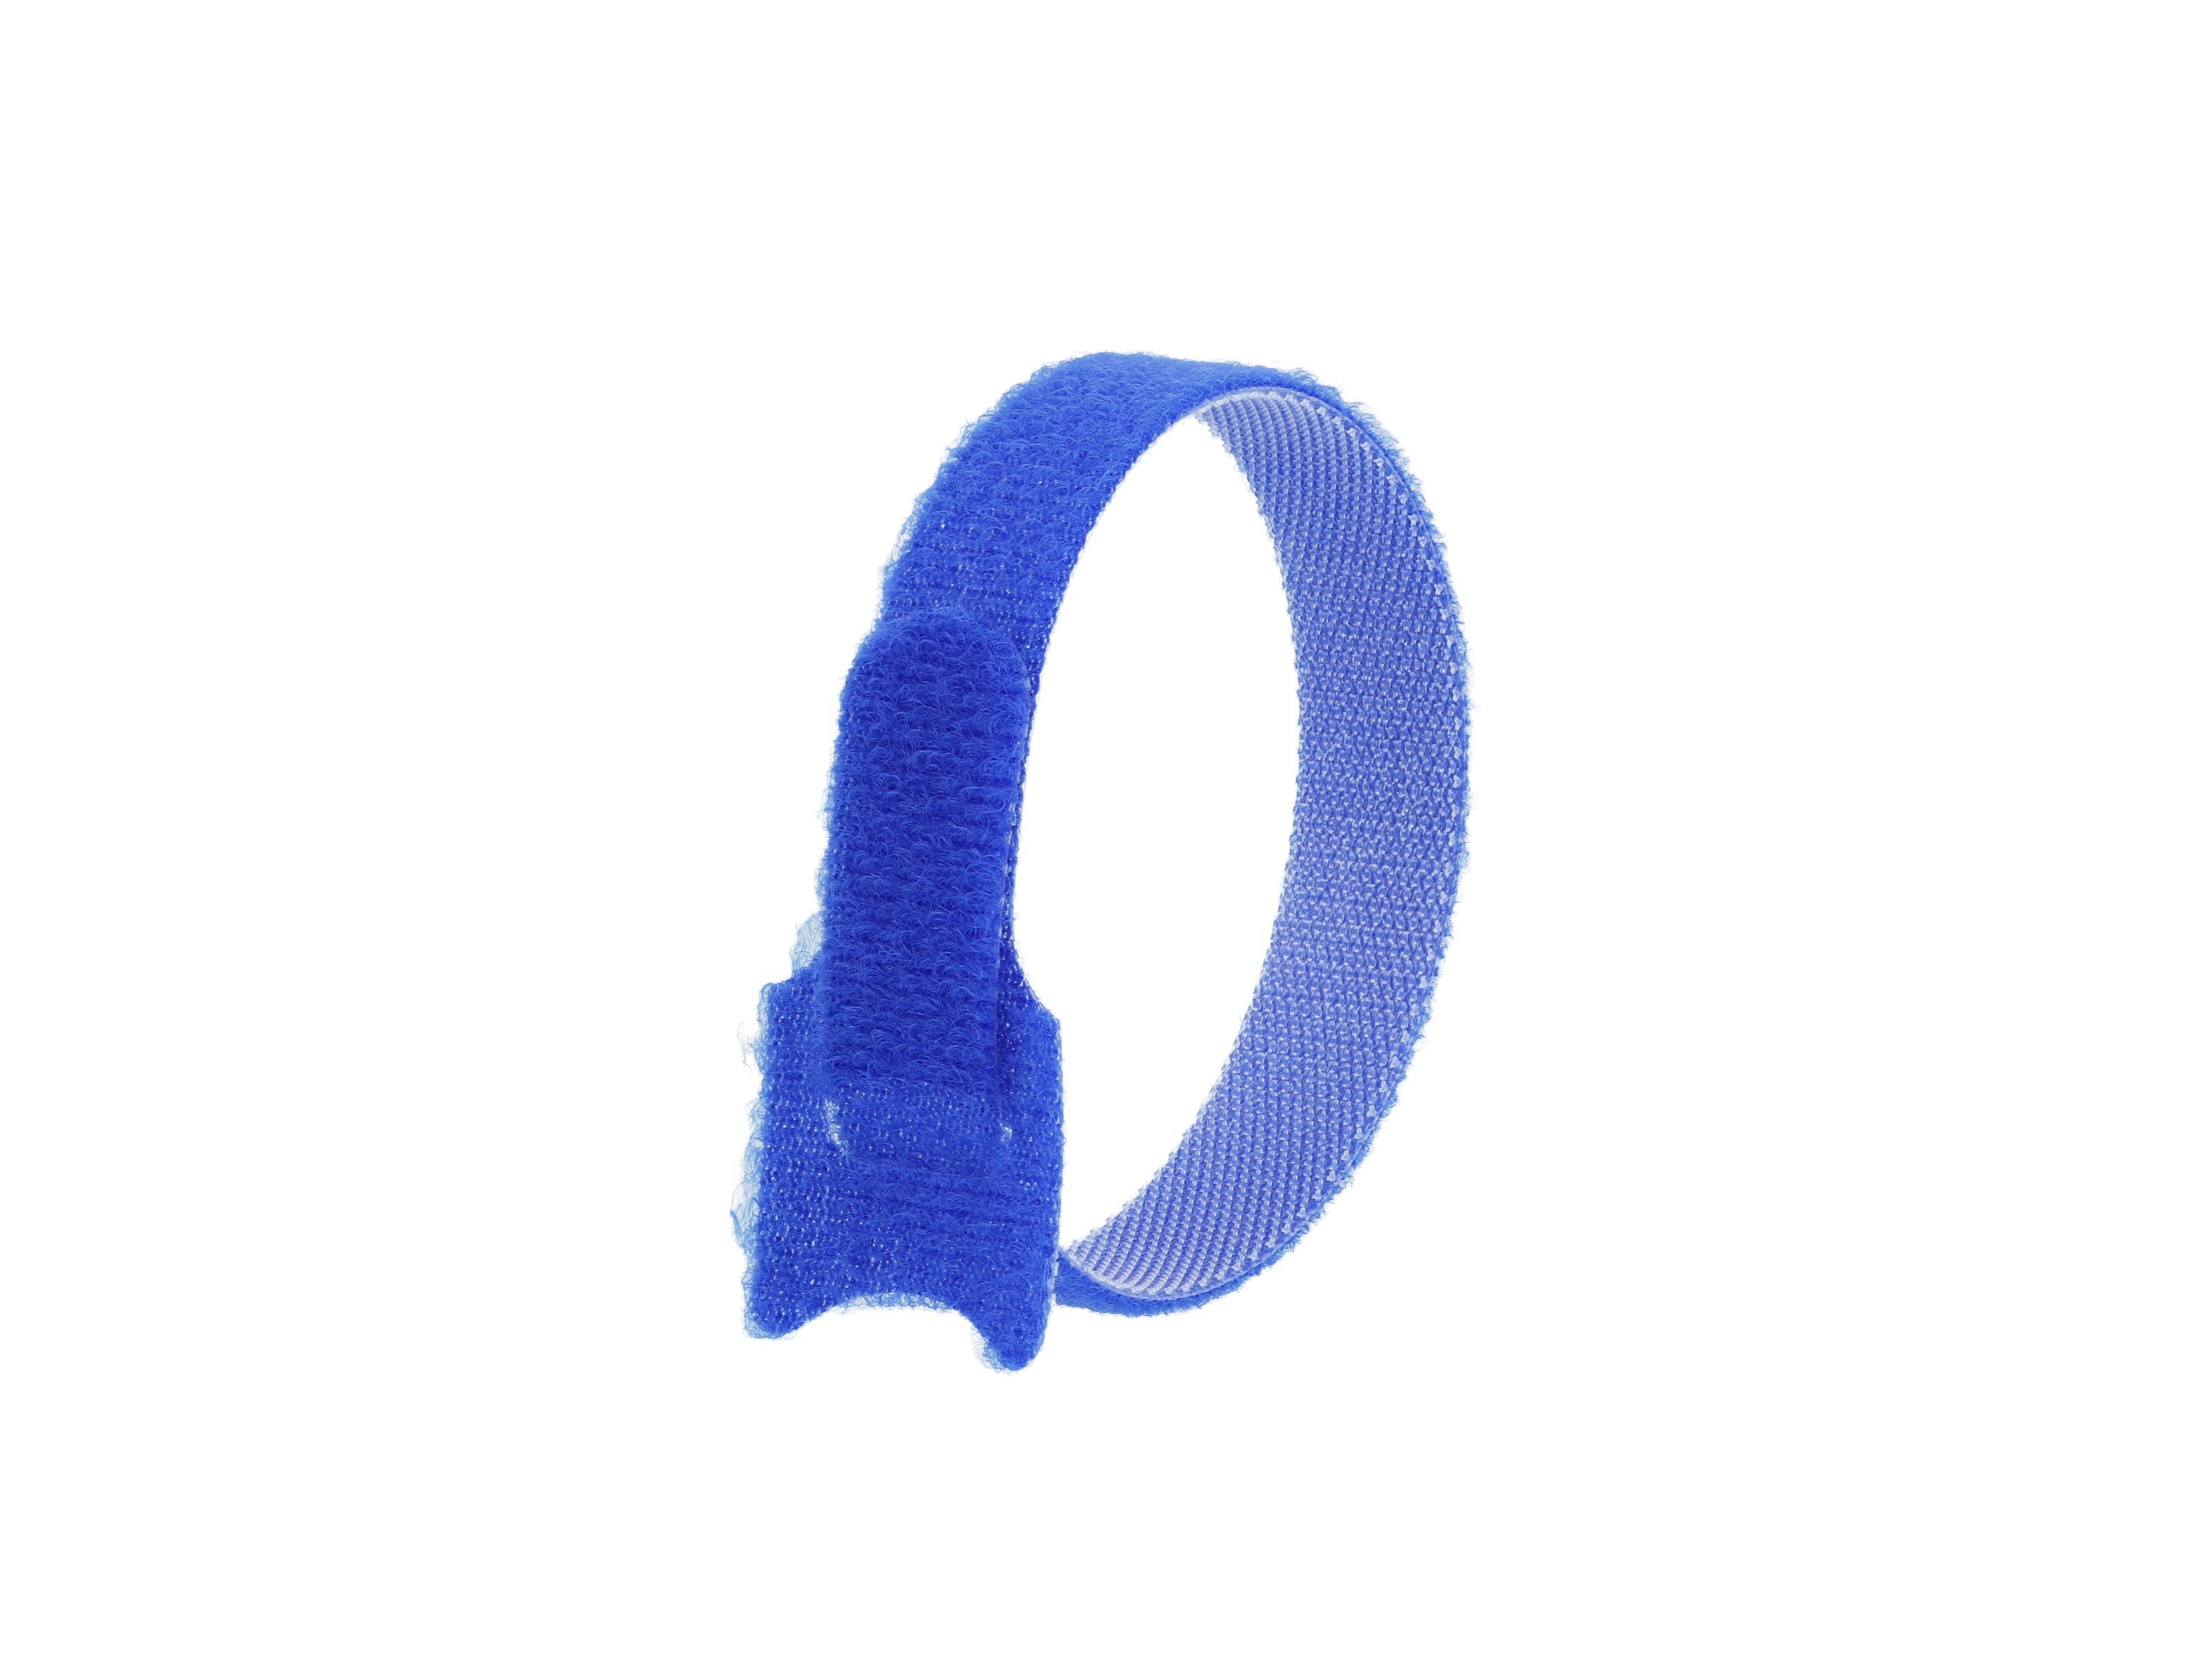 8 Inch Blue Reuseable Tie Wrap - 50 Pack - Secure™ Cable Ties